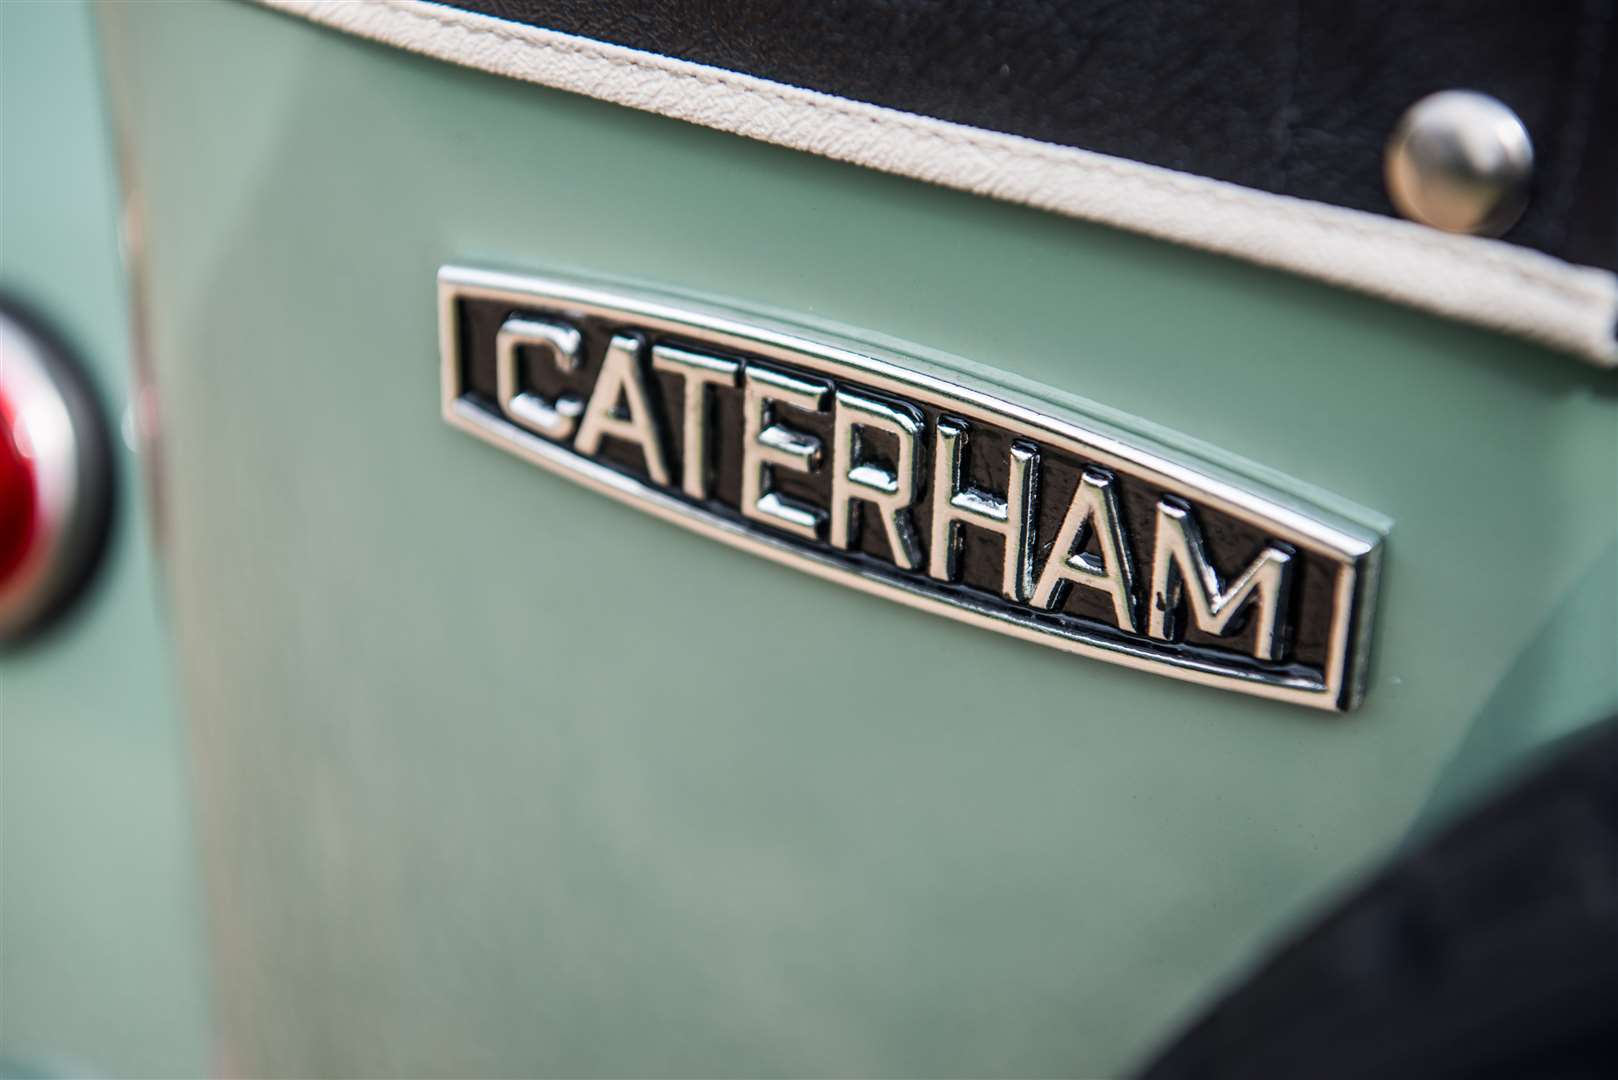 Caterham has been made in Dartford since 1987